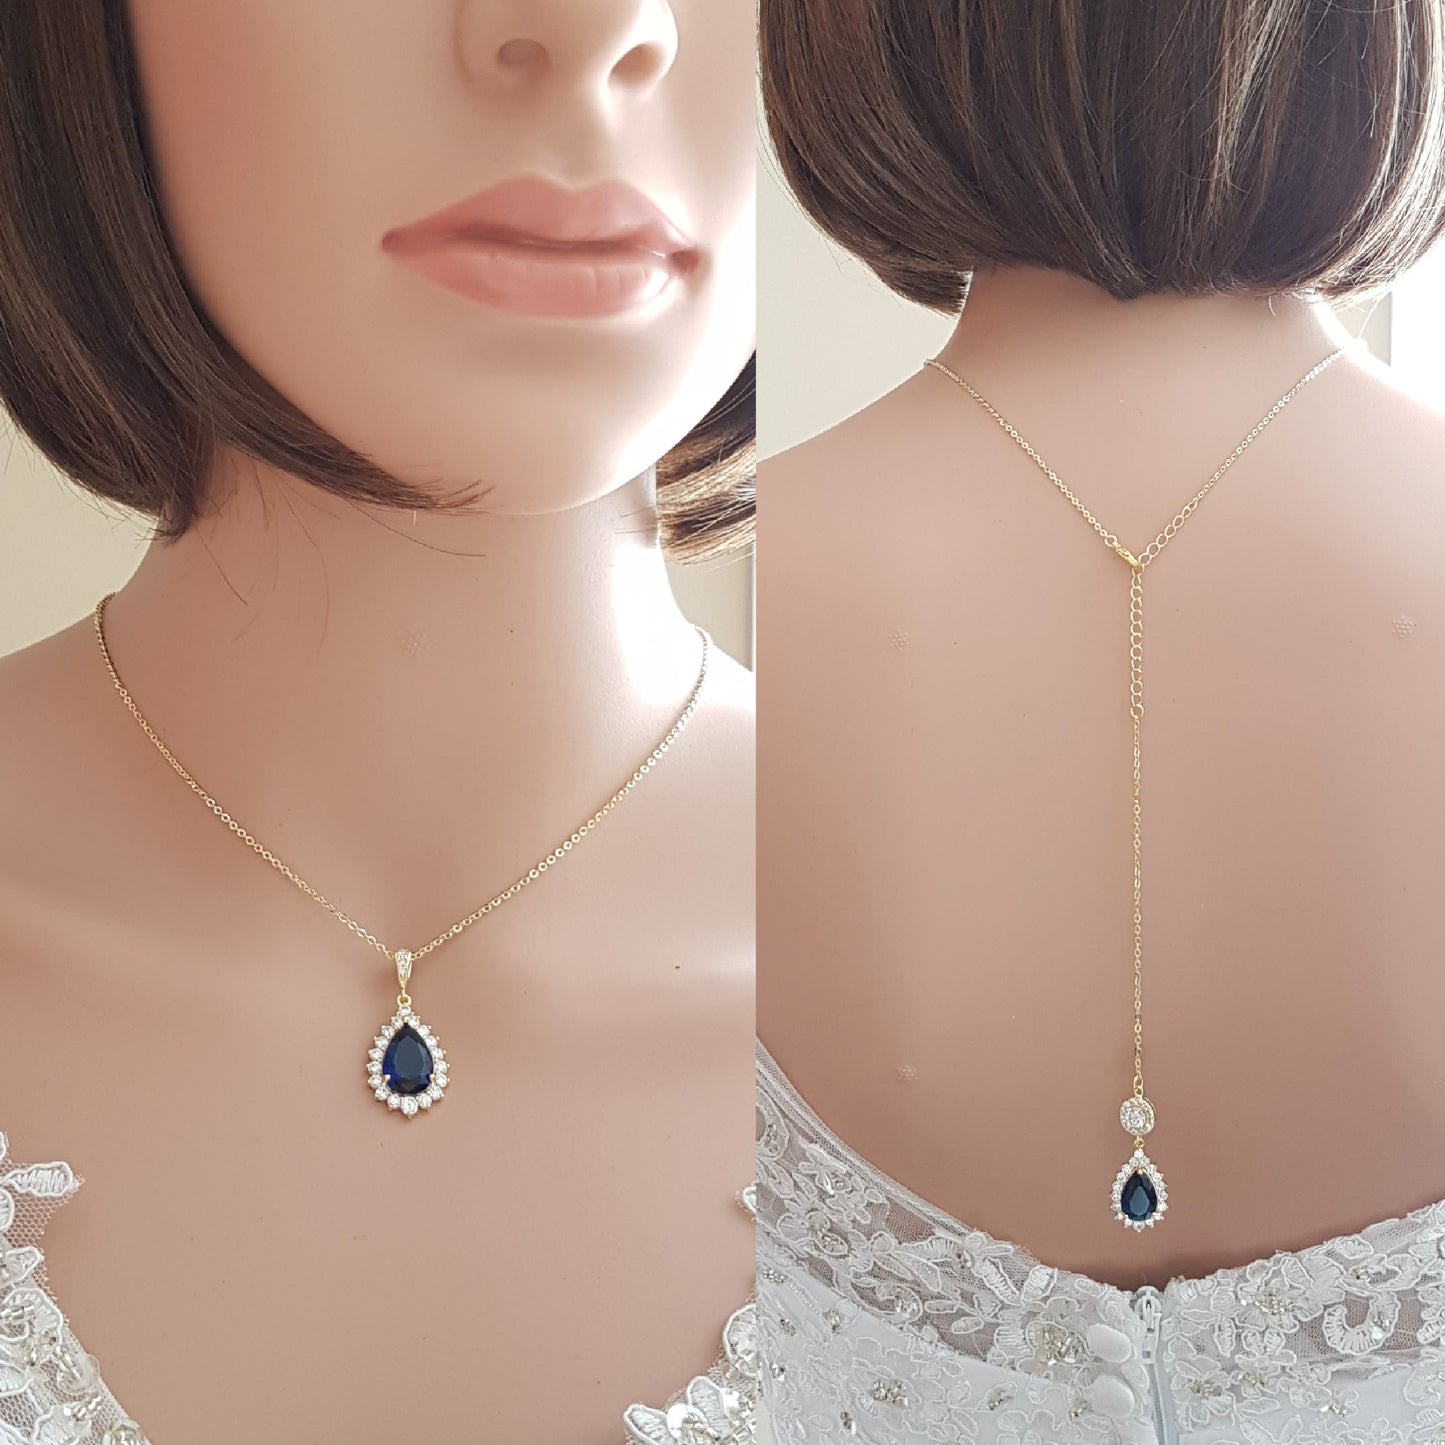 Blue & Gold Necklace with Backdrop-Aoi